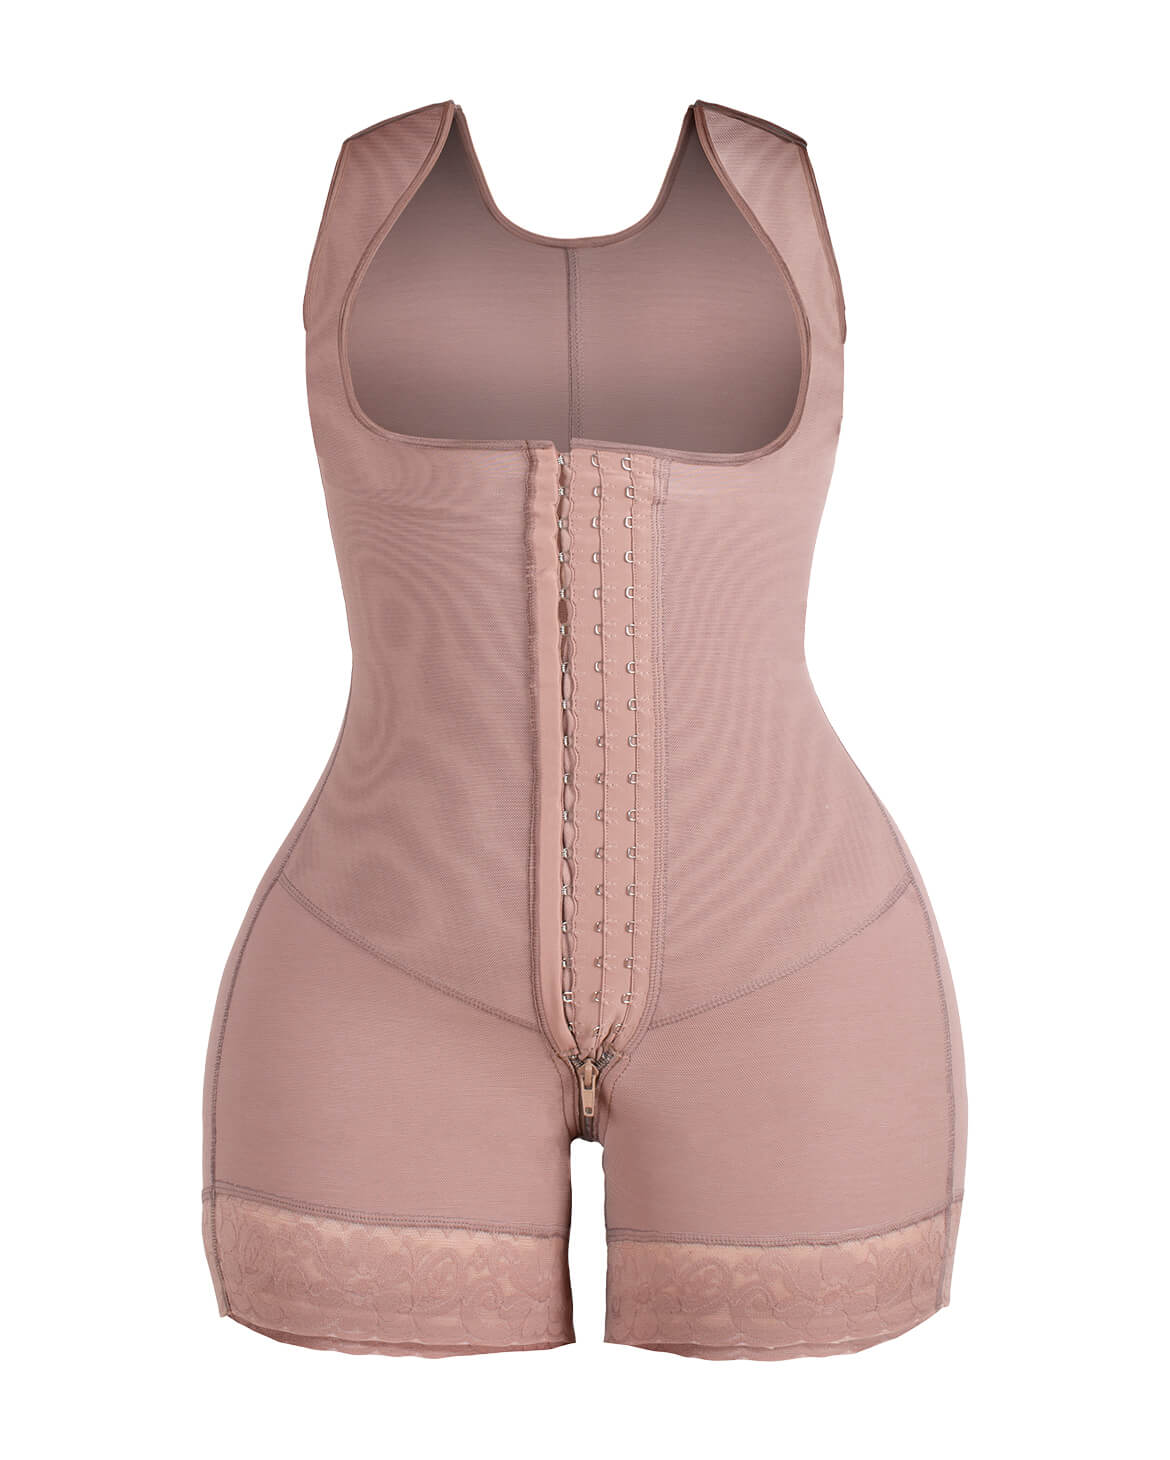 Bella Bodies Shapewear targets cellulite and shapes legs